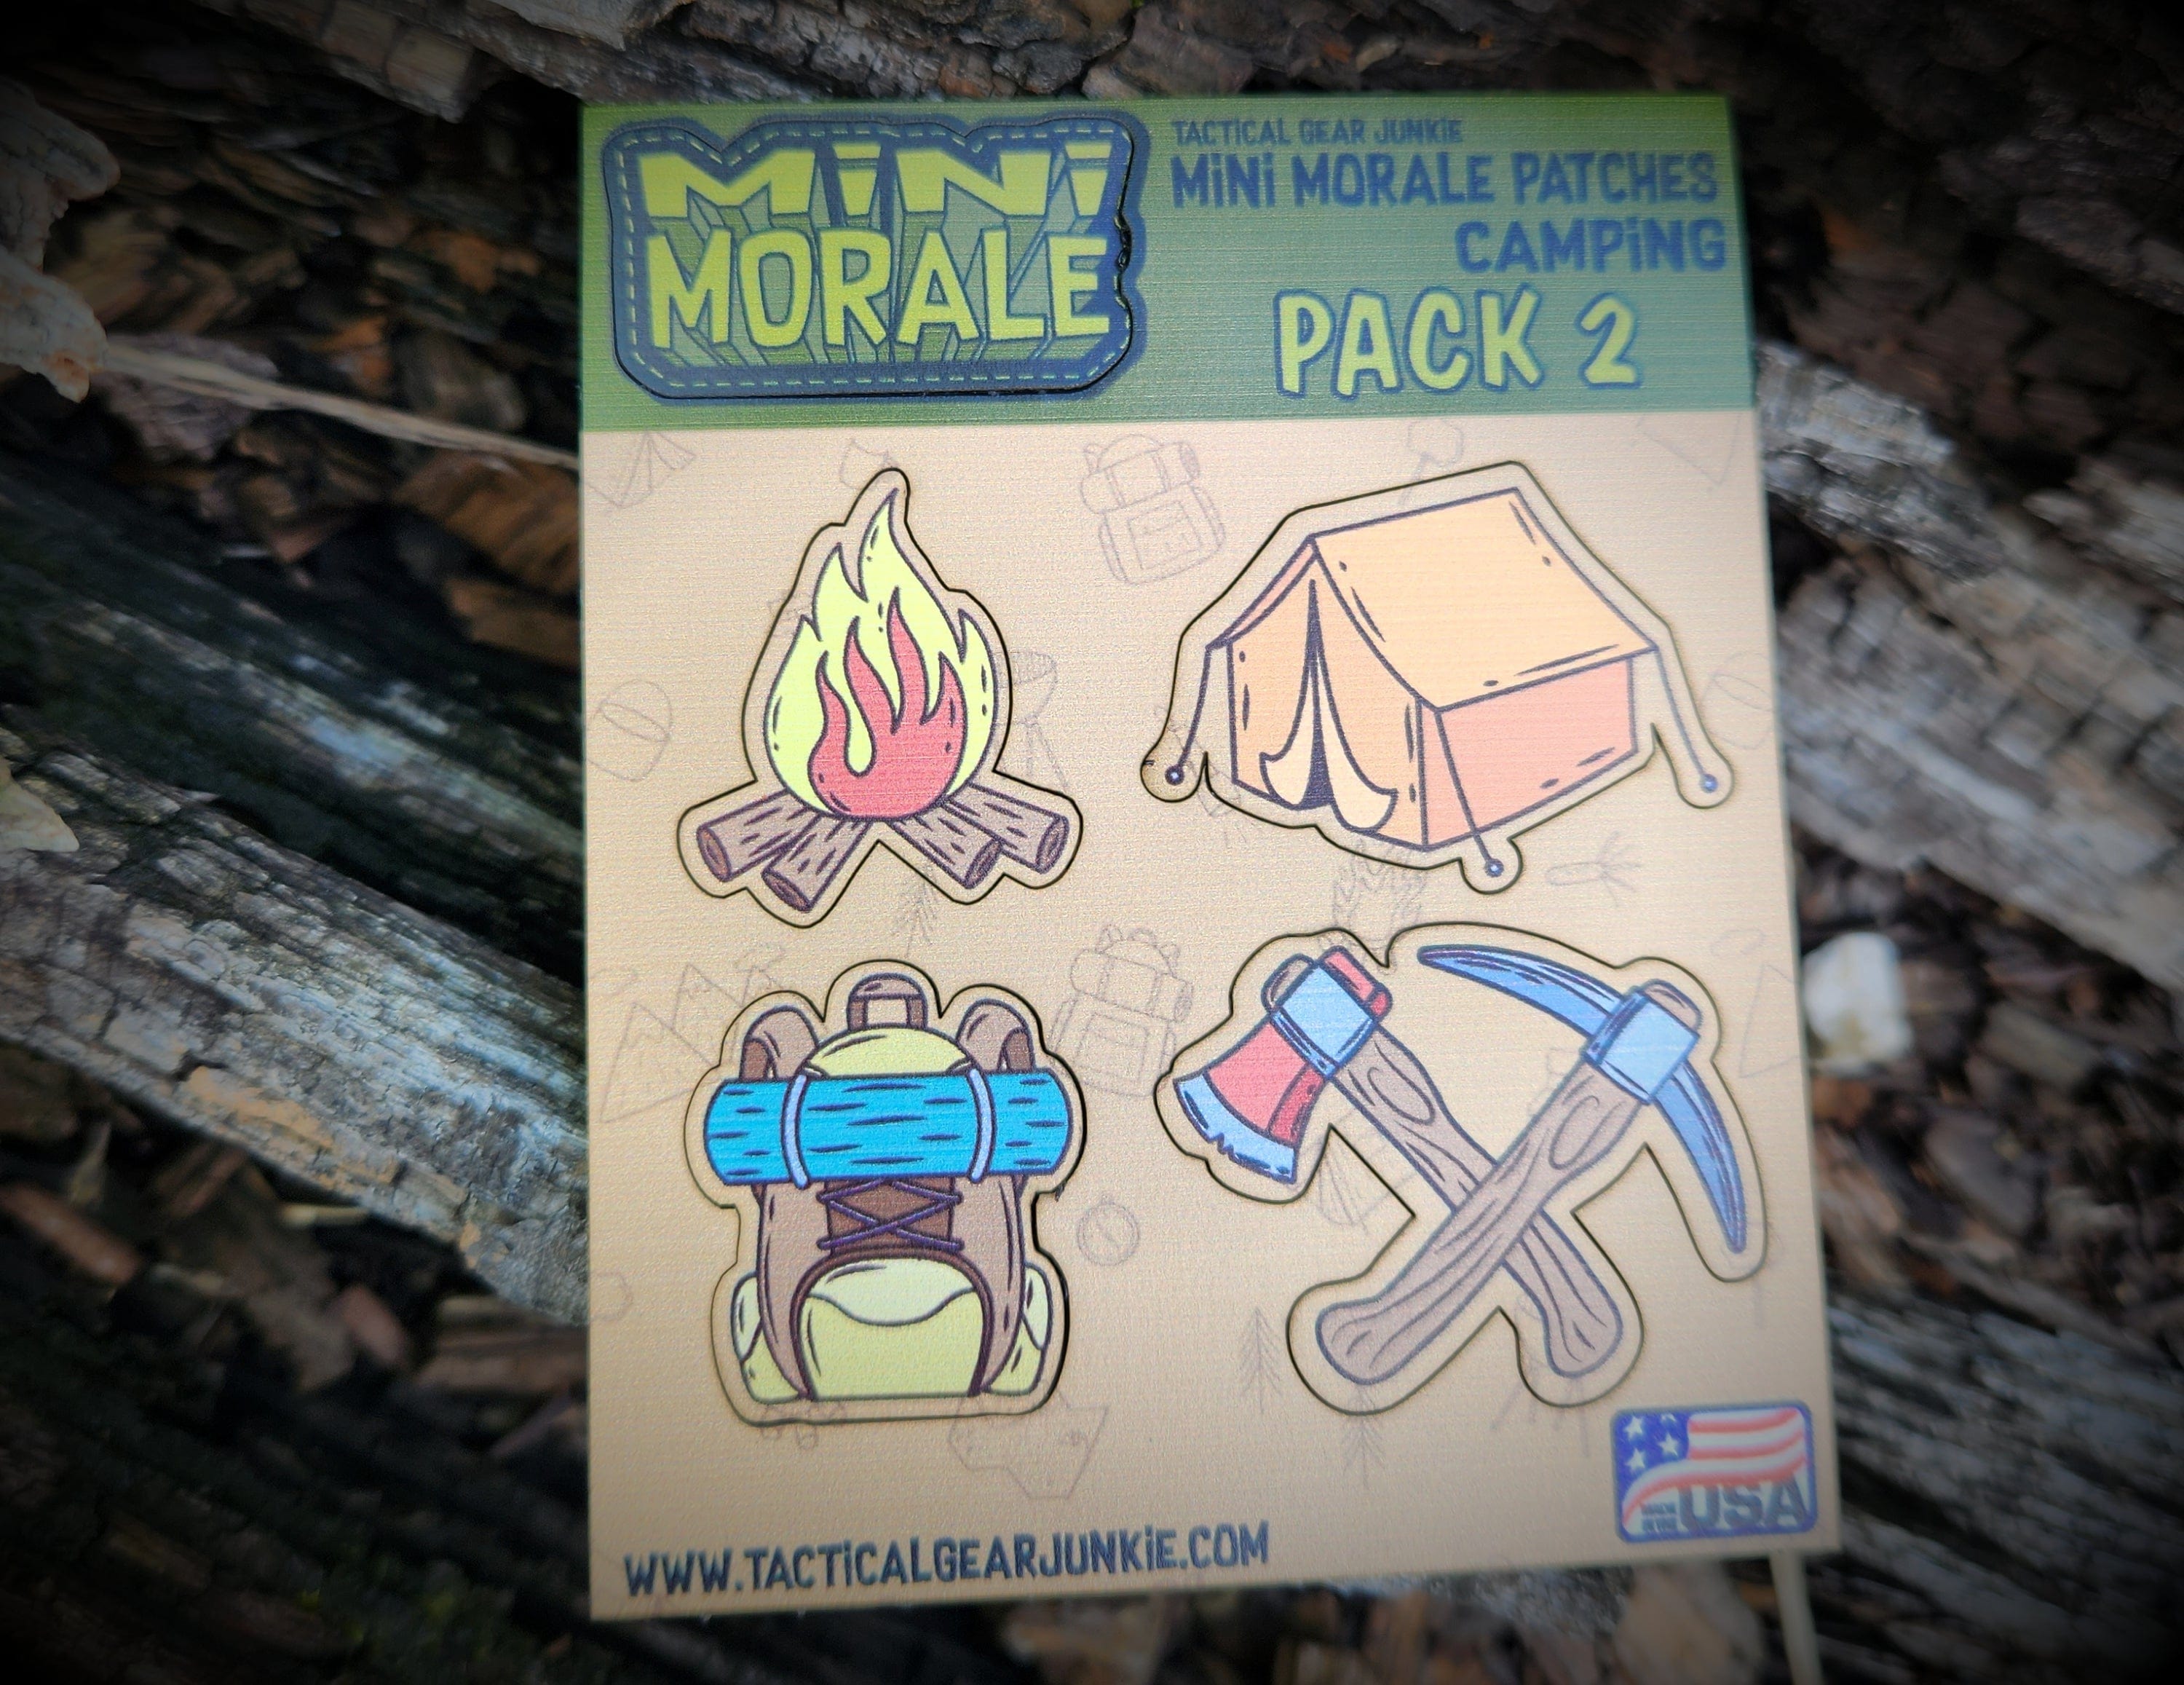 Tactical Gear Junkie Patches Mini Morale - Camping Pack 2